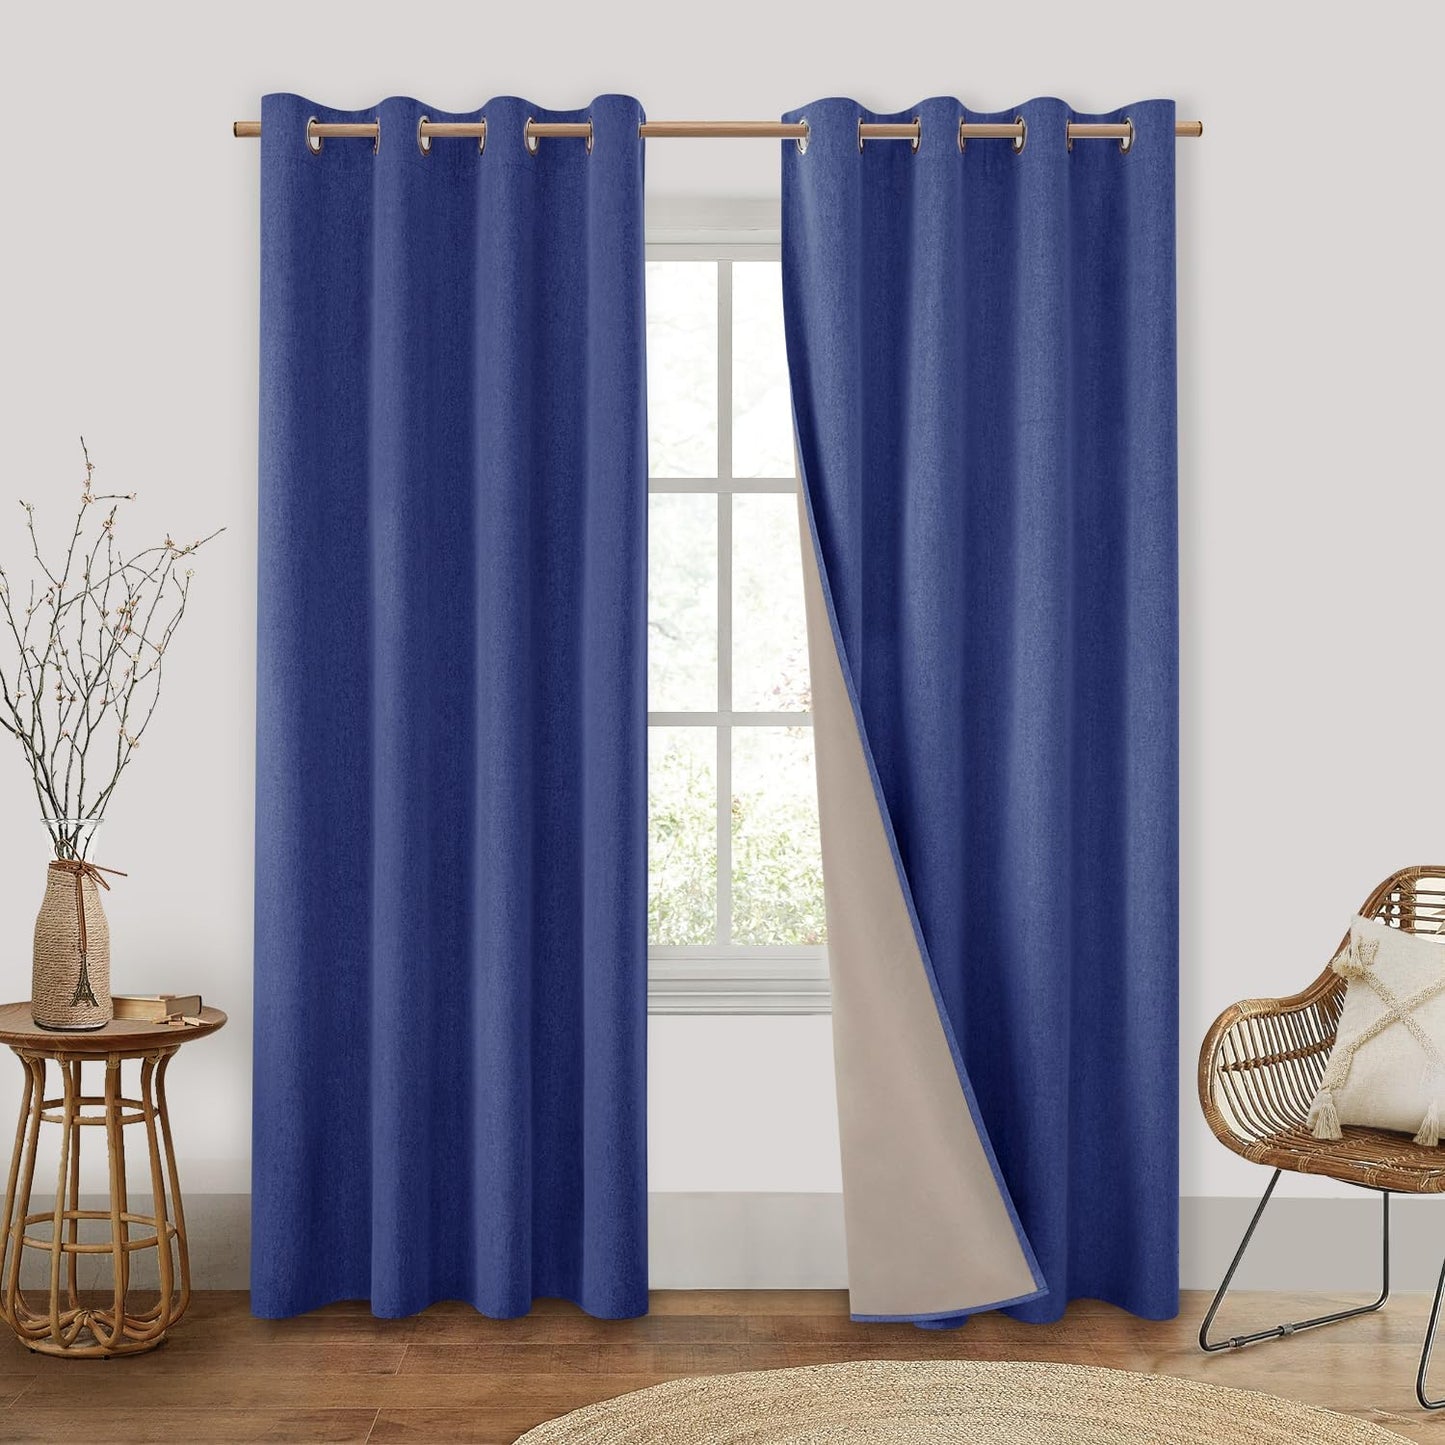 HOMEIDEAS 100% Blackout Linen Curtains for Bedroom 84 Inches Long 2 Panels Blush Pink Curtains Full Black Out Thermal Insulated Grommet Window Curtains/Drapes with Liner for Nursery  HOMEIDEAS Royal Blue 52"W X 84"L 